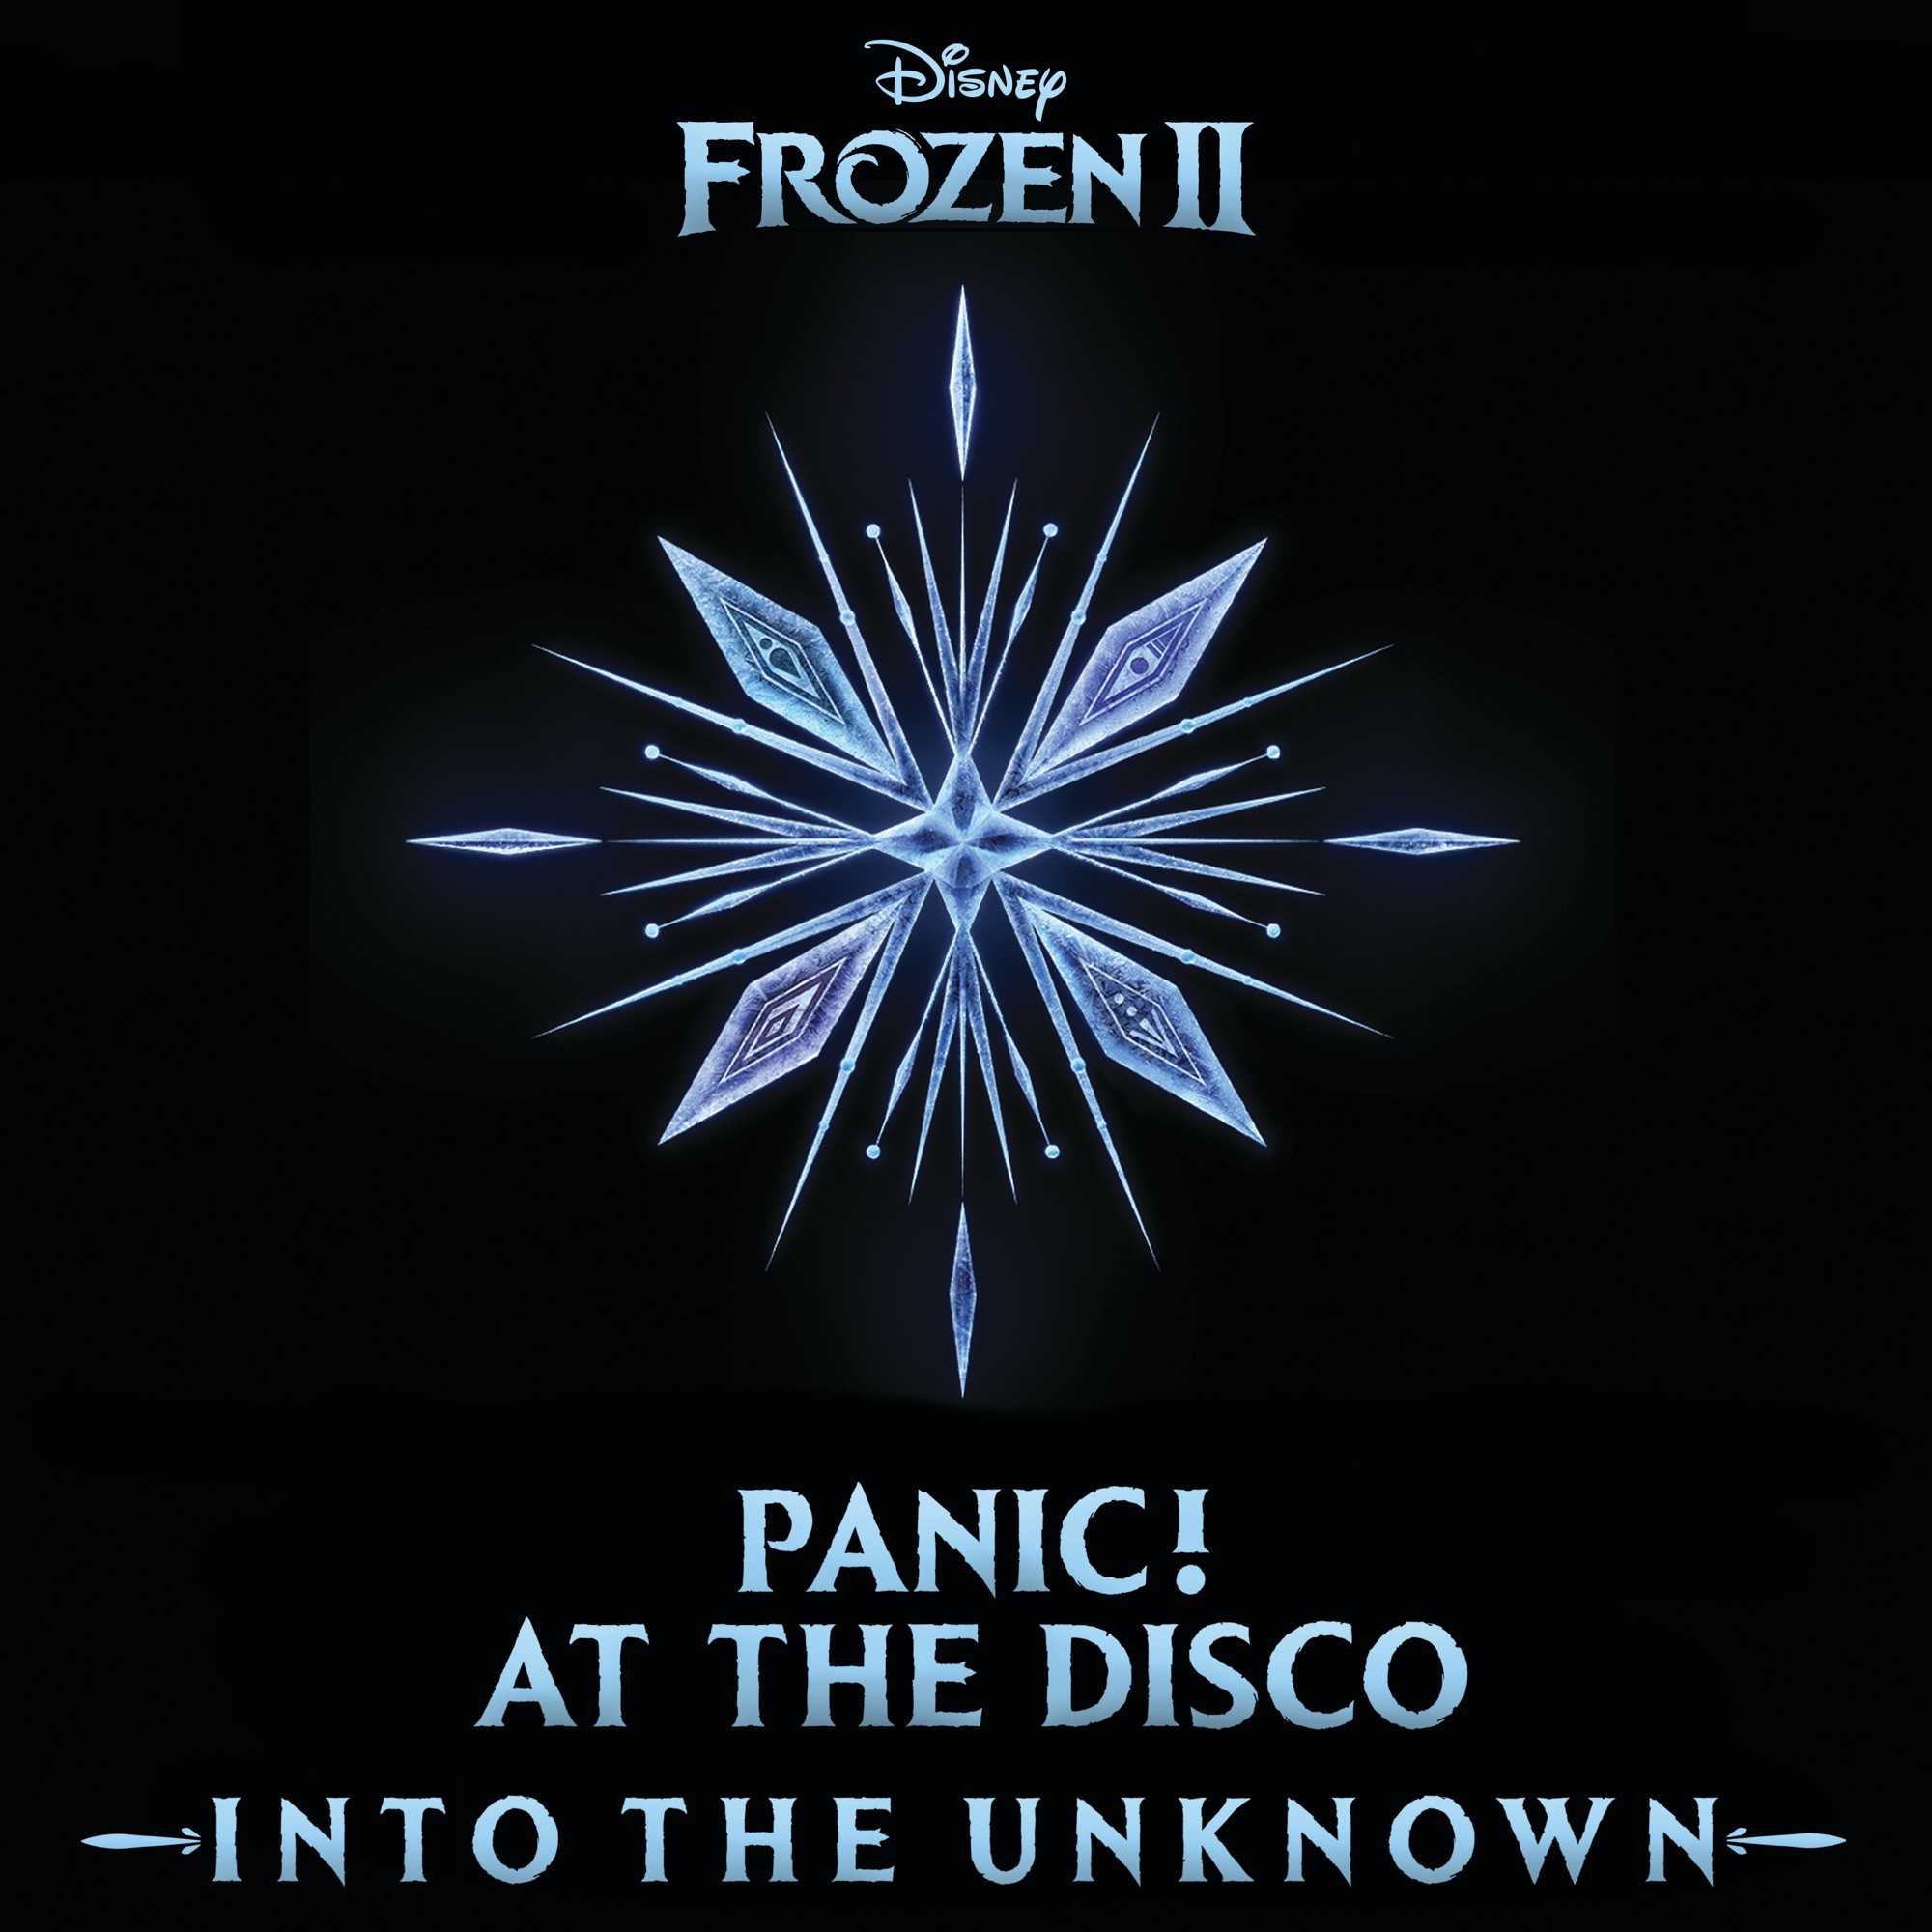 Panic! at The Disco - Into The Unknown (From Frozen 2)